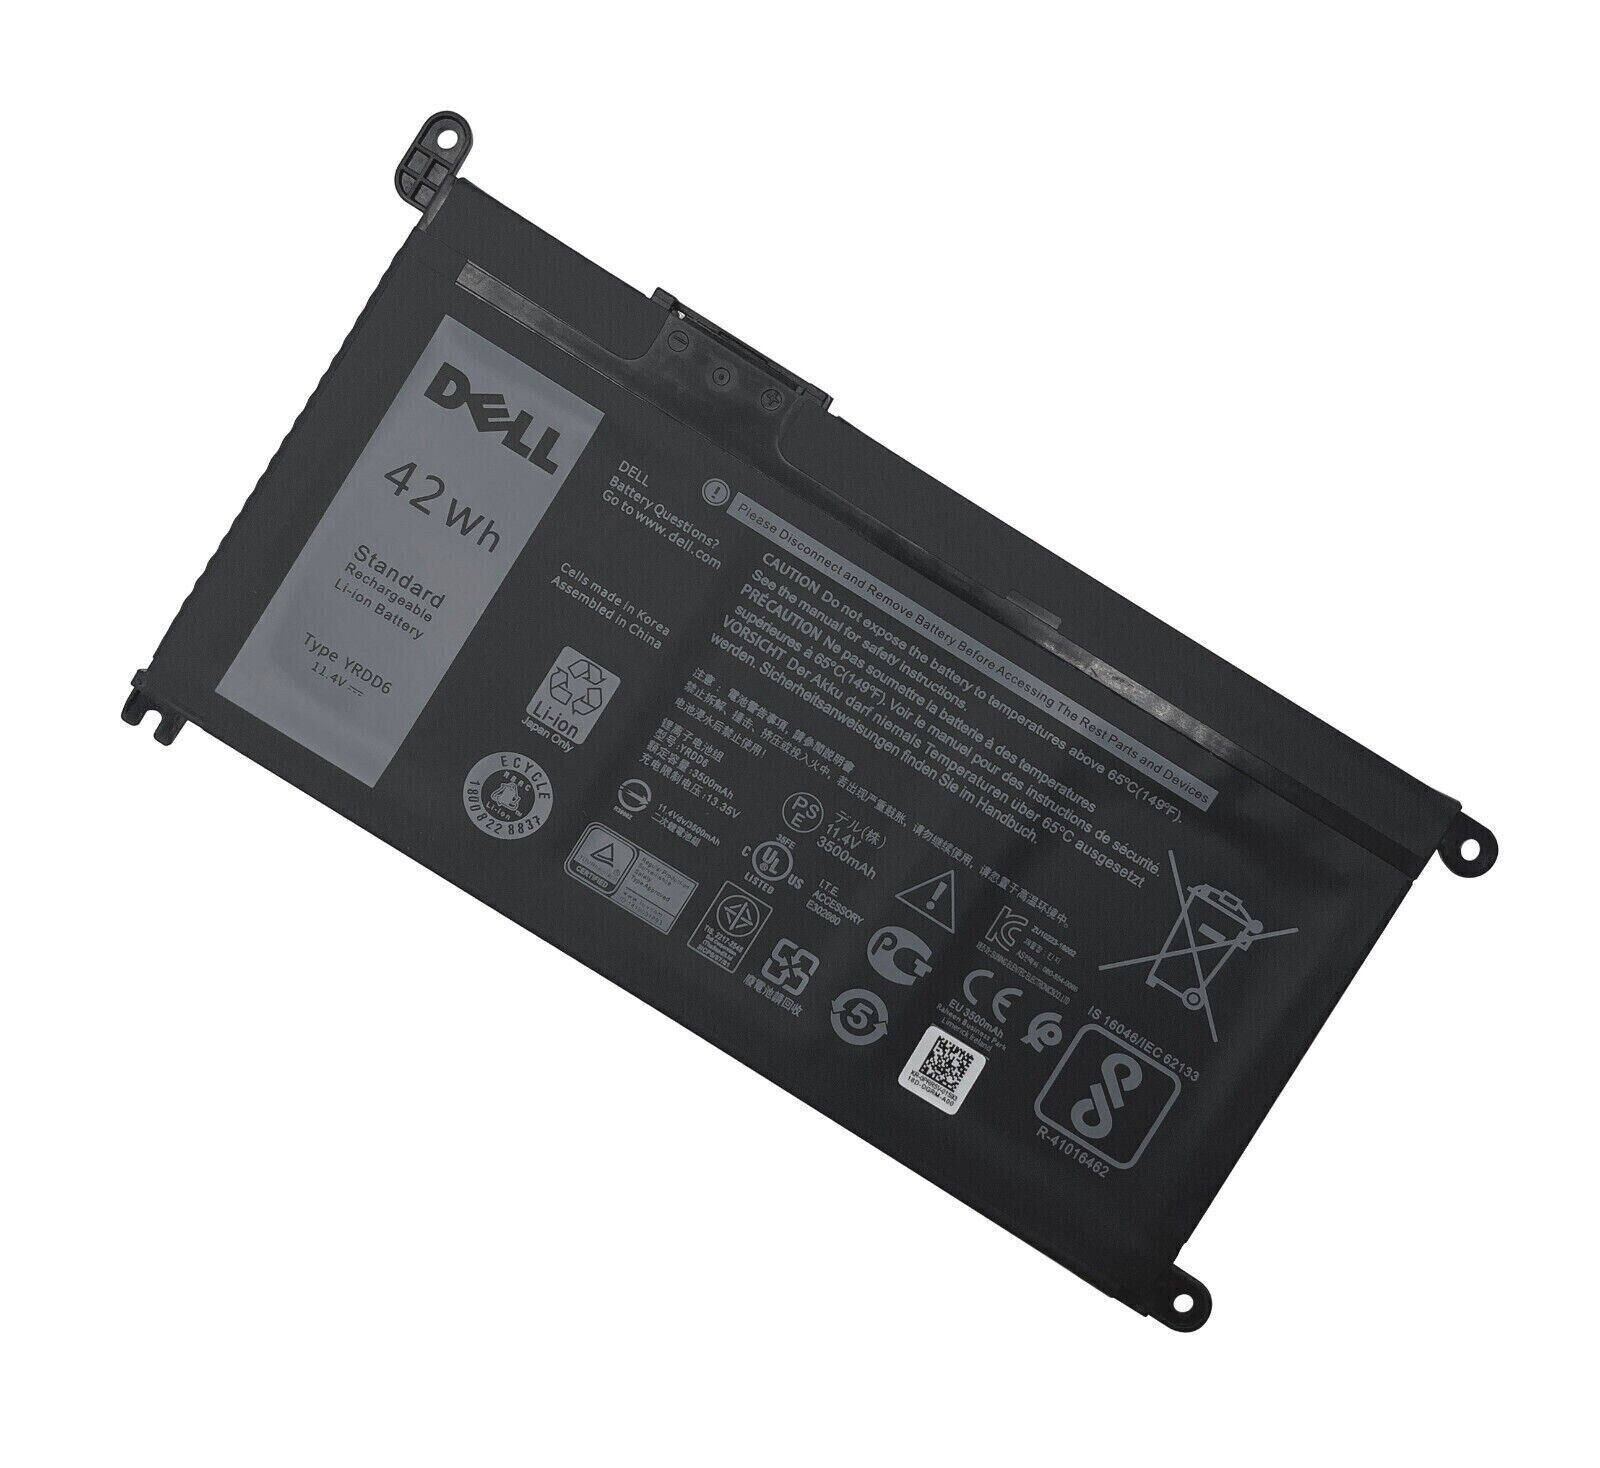 Genuine 42WH YRDD6 Battery For Dell Inspiron 3493 3582 3583 3593 3793 VM732 US